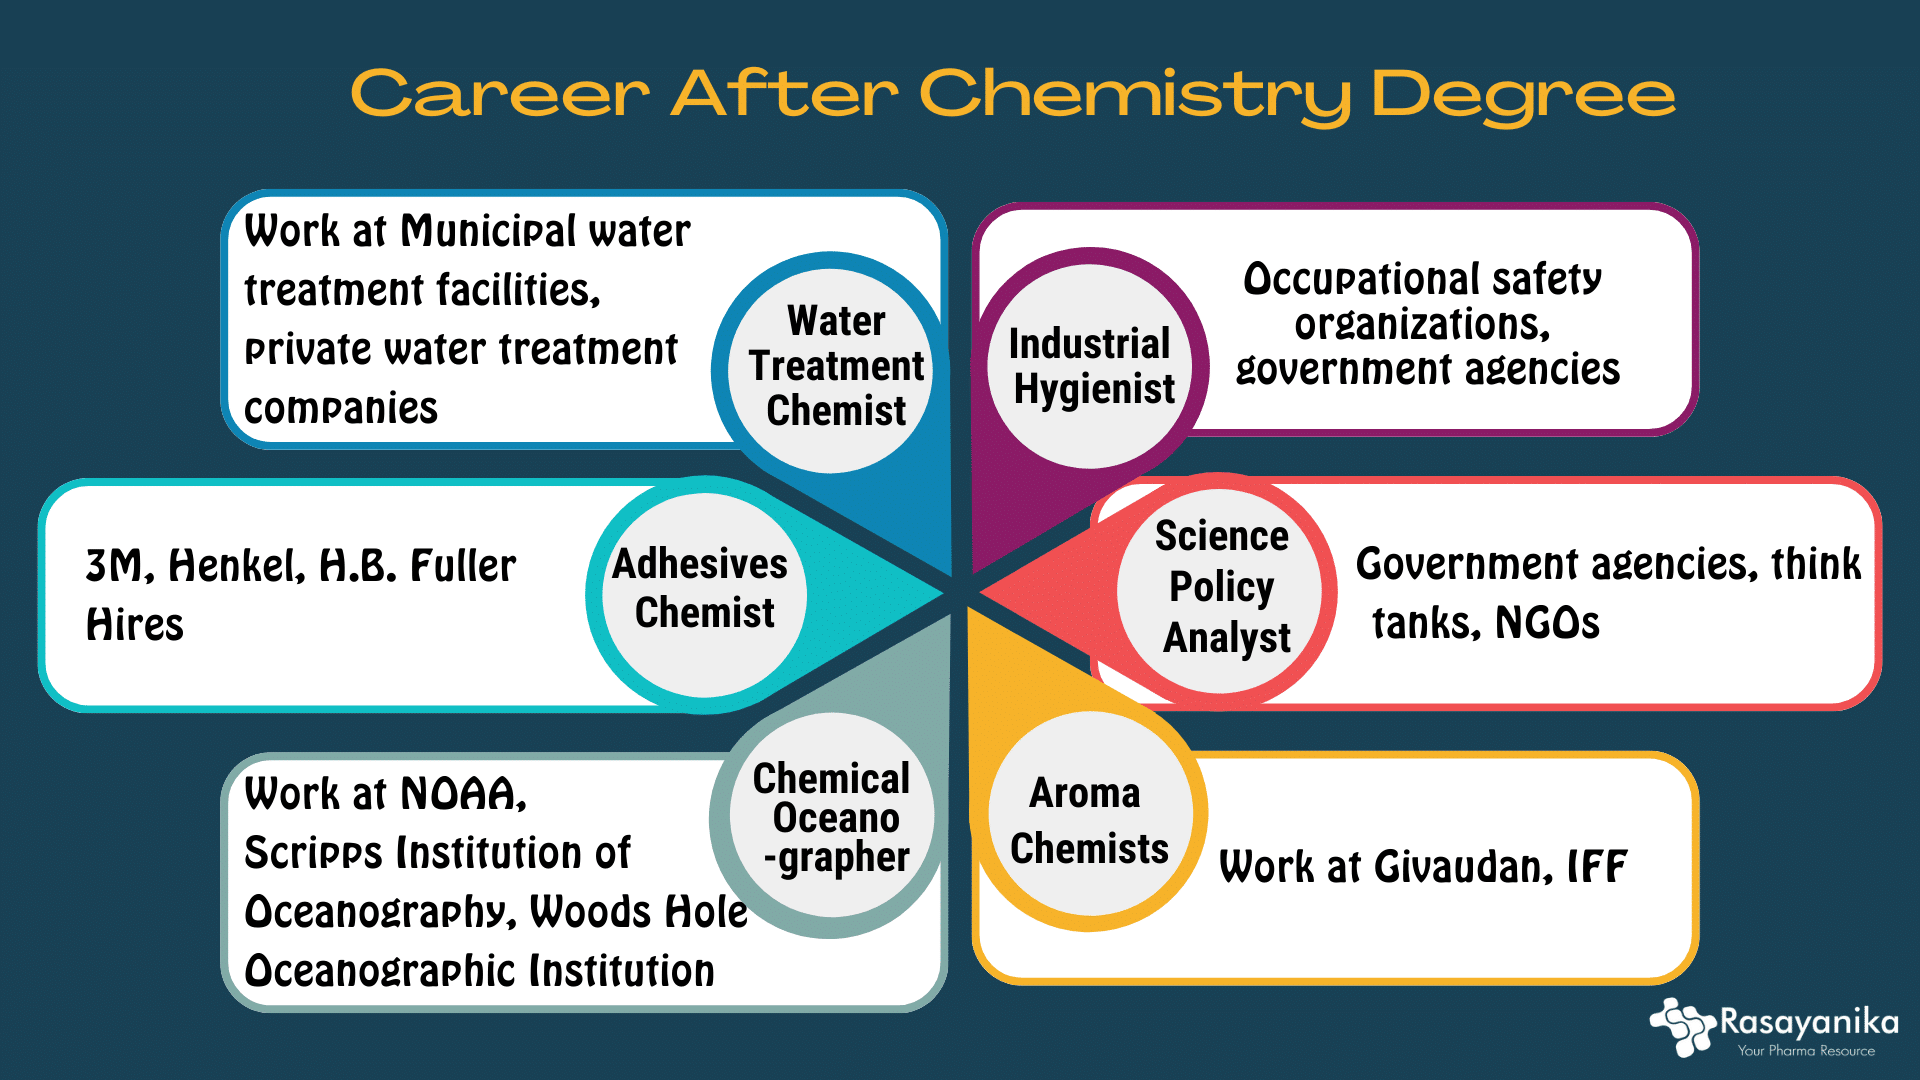 Career Options after Chemistry